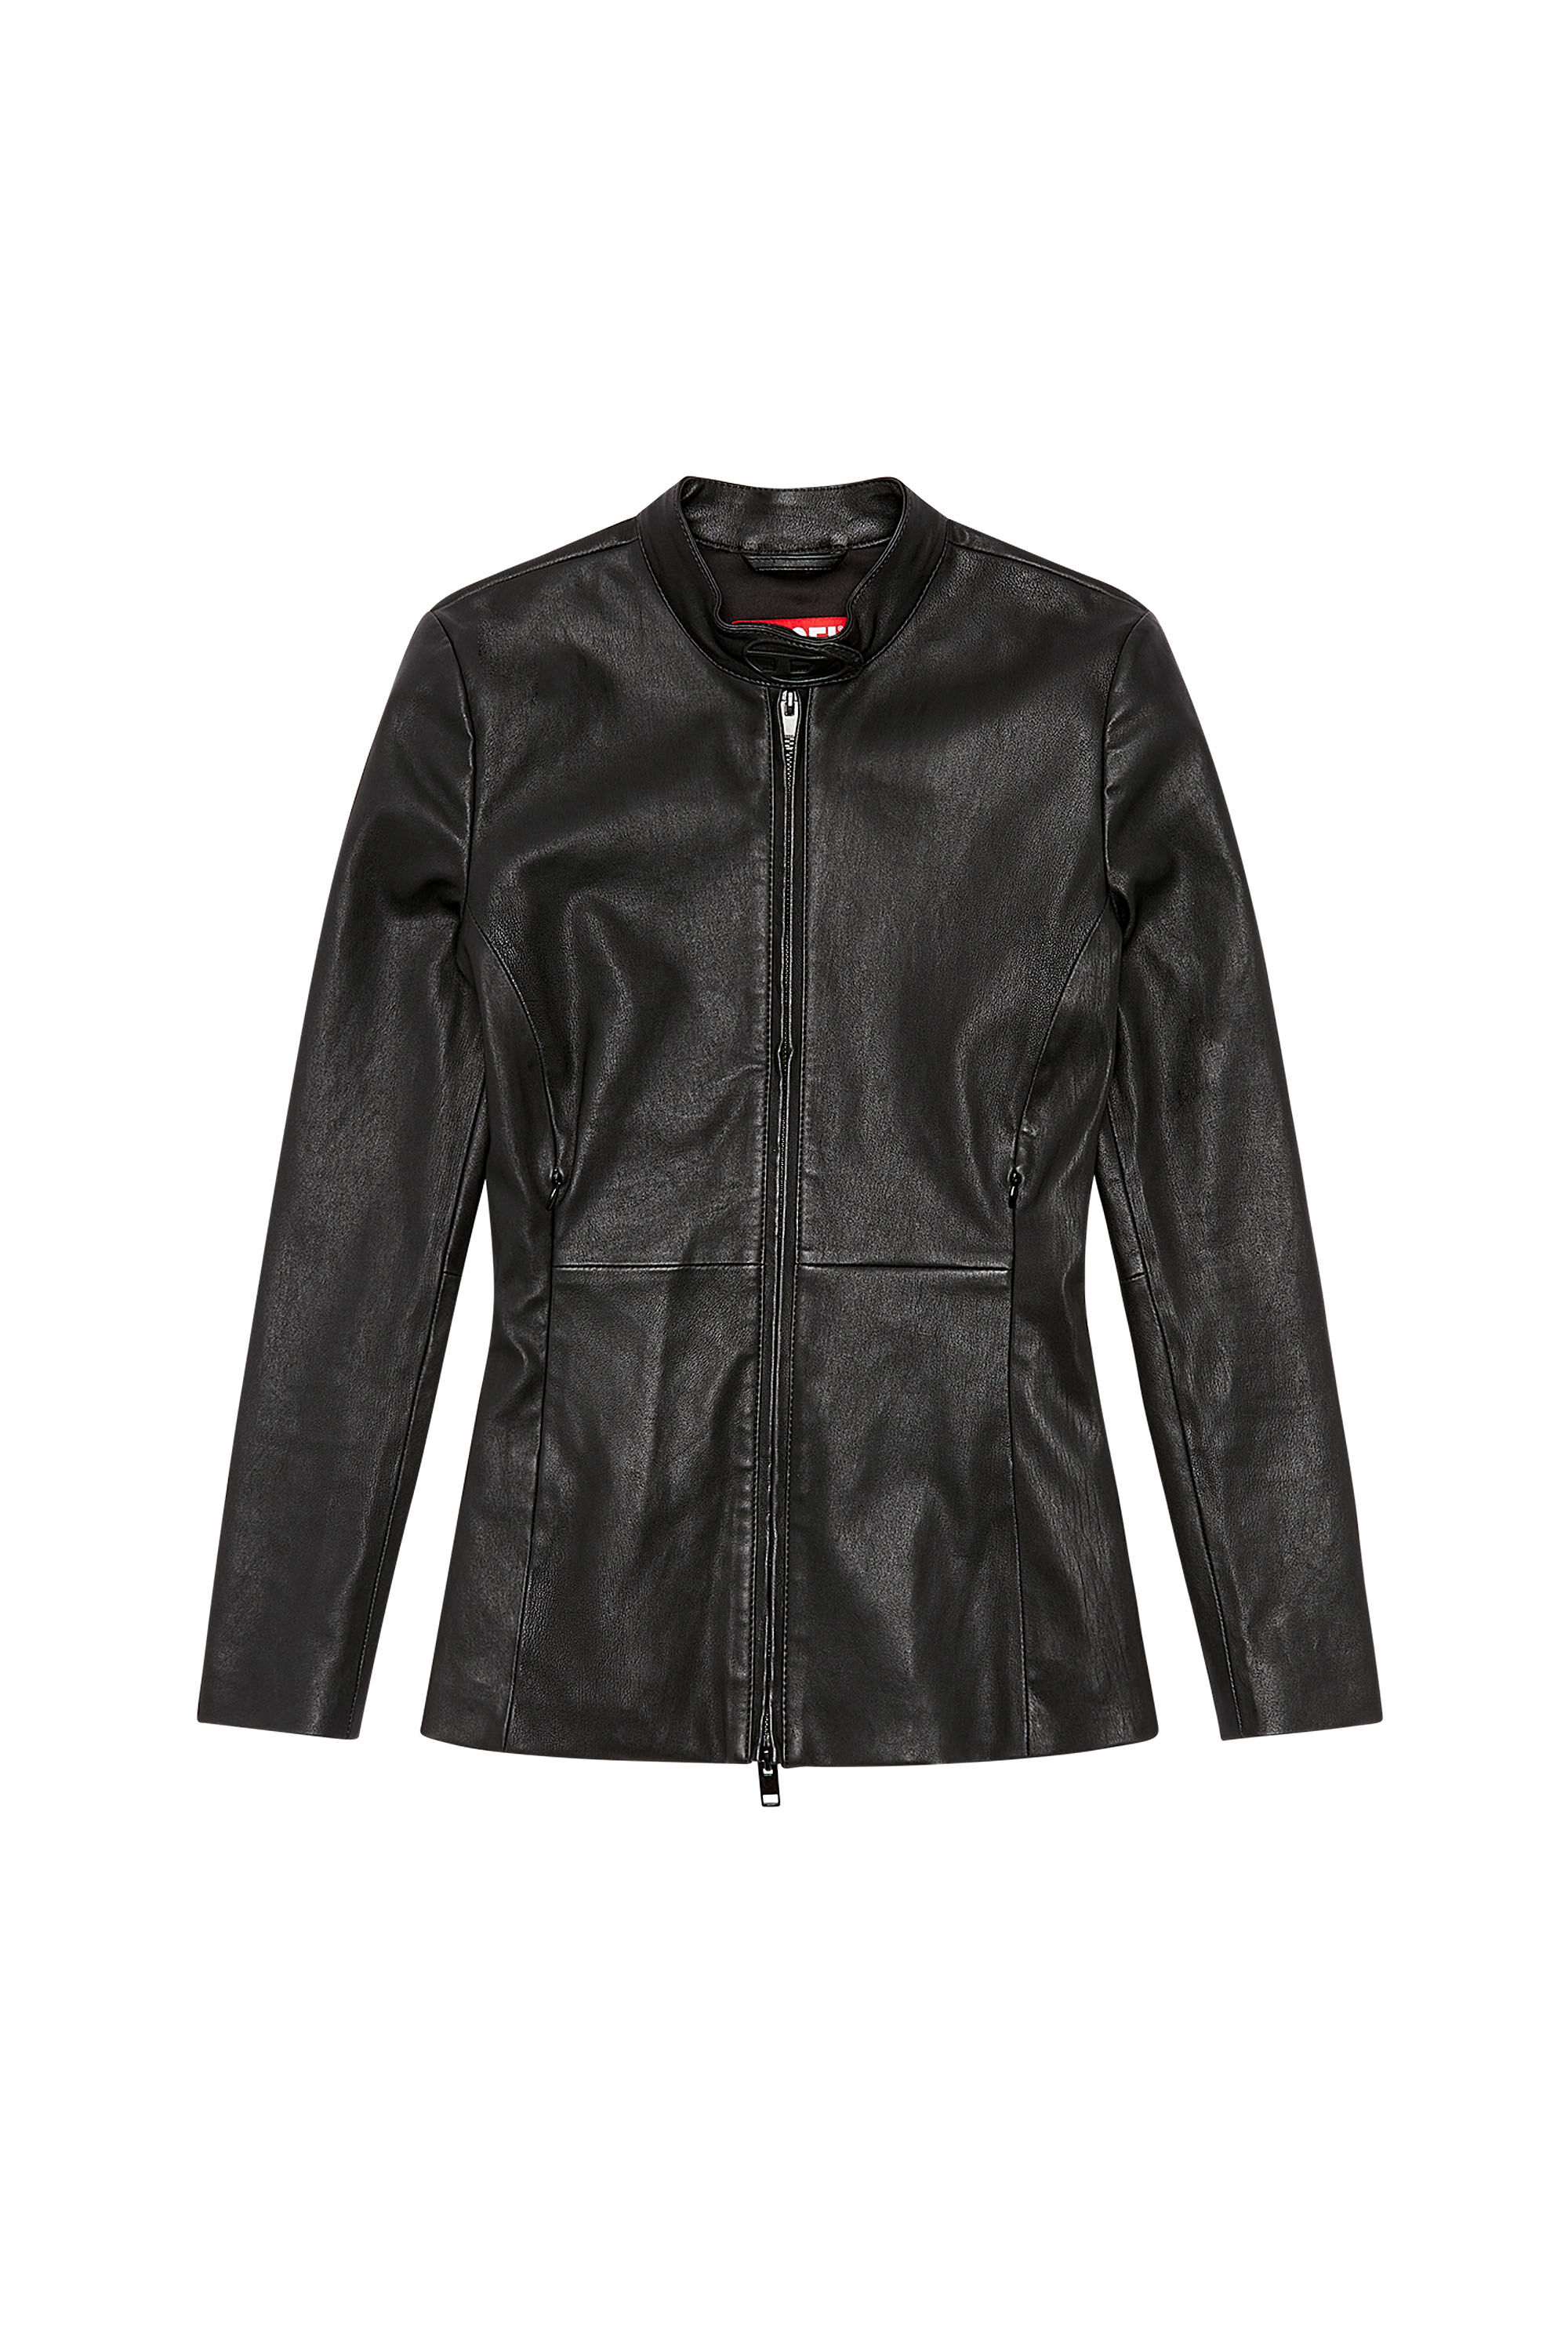 Diesel - L-SORY-N1, Donna Giacca in pelle stretch in Nero - Image 2